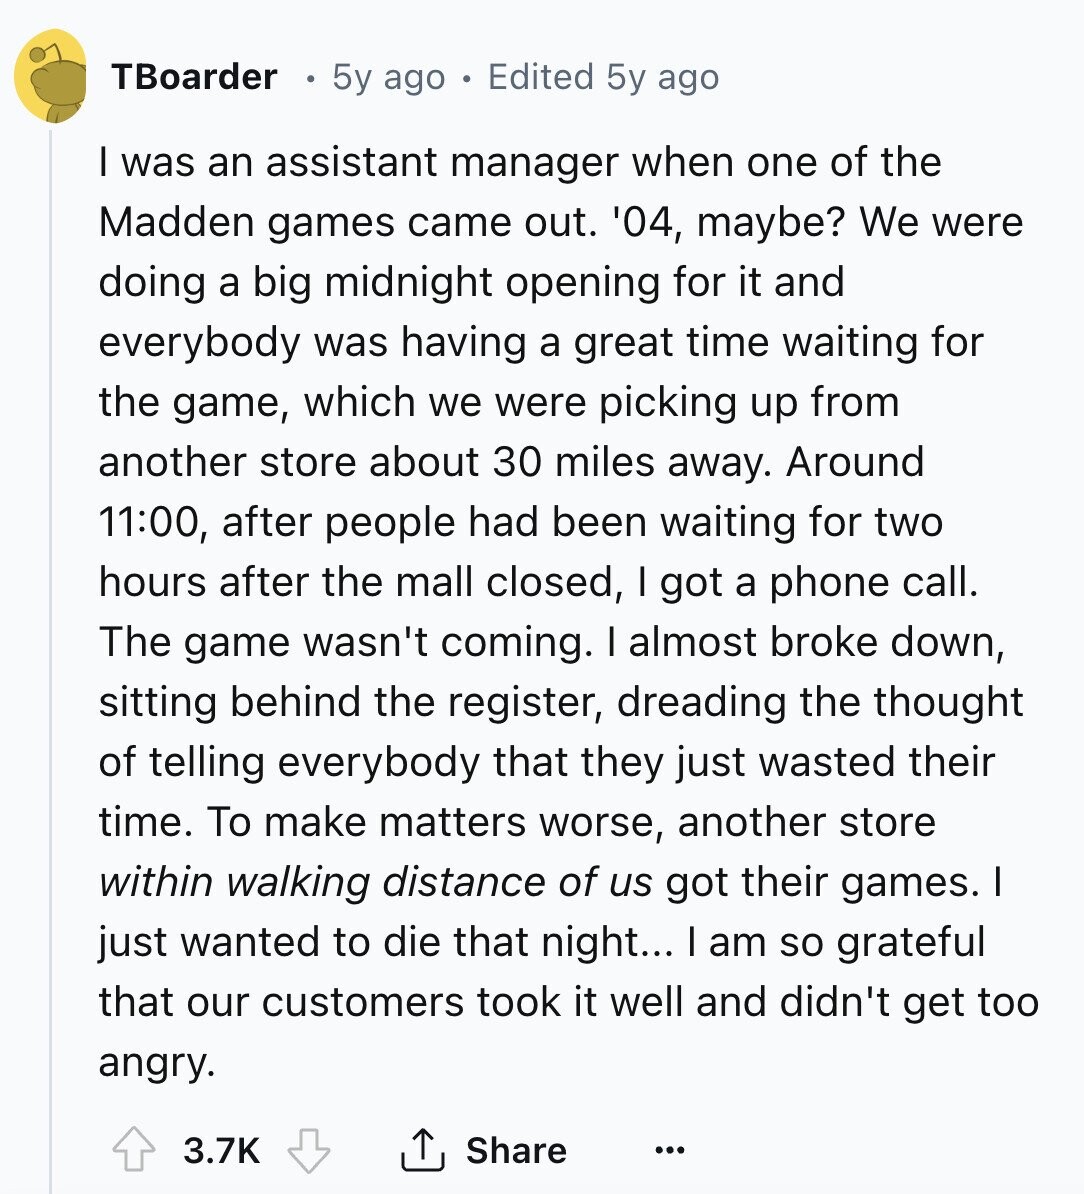 TBoarder 5y ago Edited 5y ago I was an assistant manager when one of the Madden games came out. '04, maybe? We were doing a big midnight opening for it and everybody was having a great time waiting for the game, which we were picking up from another store about 30 miles away. Around 11:00, after people had been waiting for two hours after the mall closed, I got a phone call. The game wasn't coming. I almost broke down, sitting behind the register, dreading the thought of telling everybody that they just wasted their time. To make matters worse, 